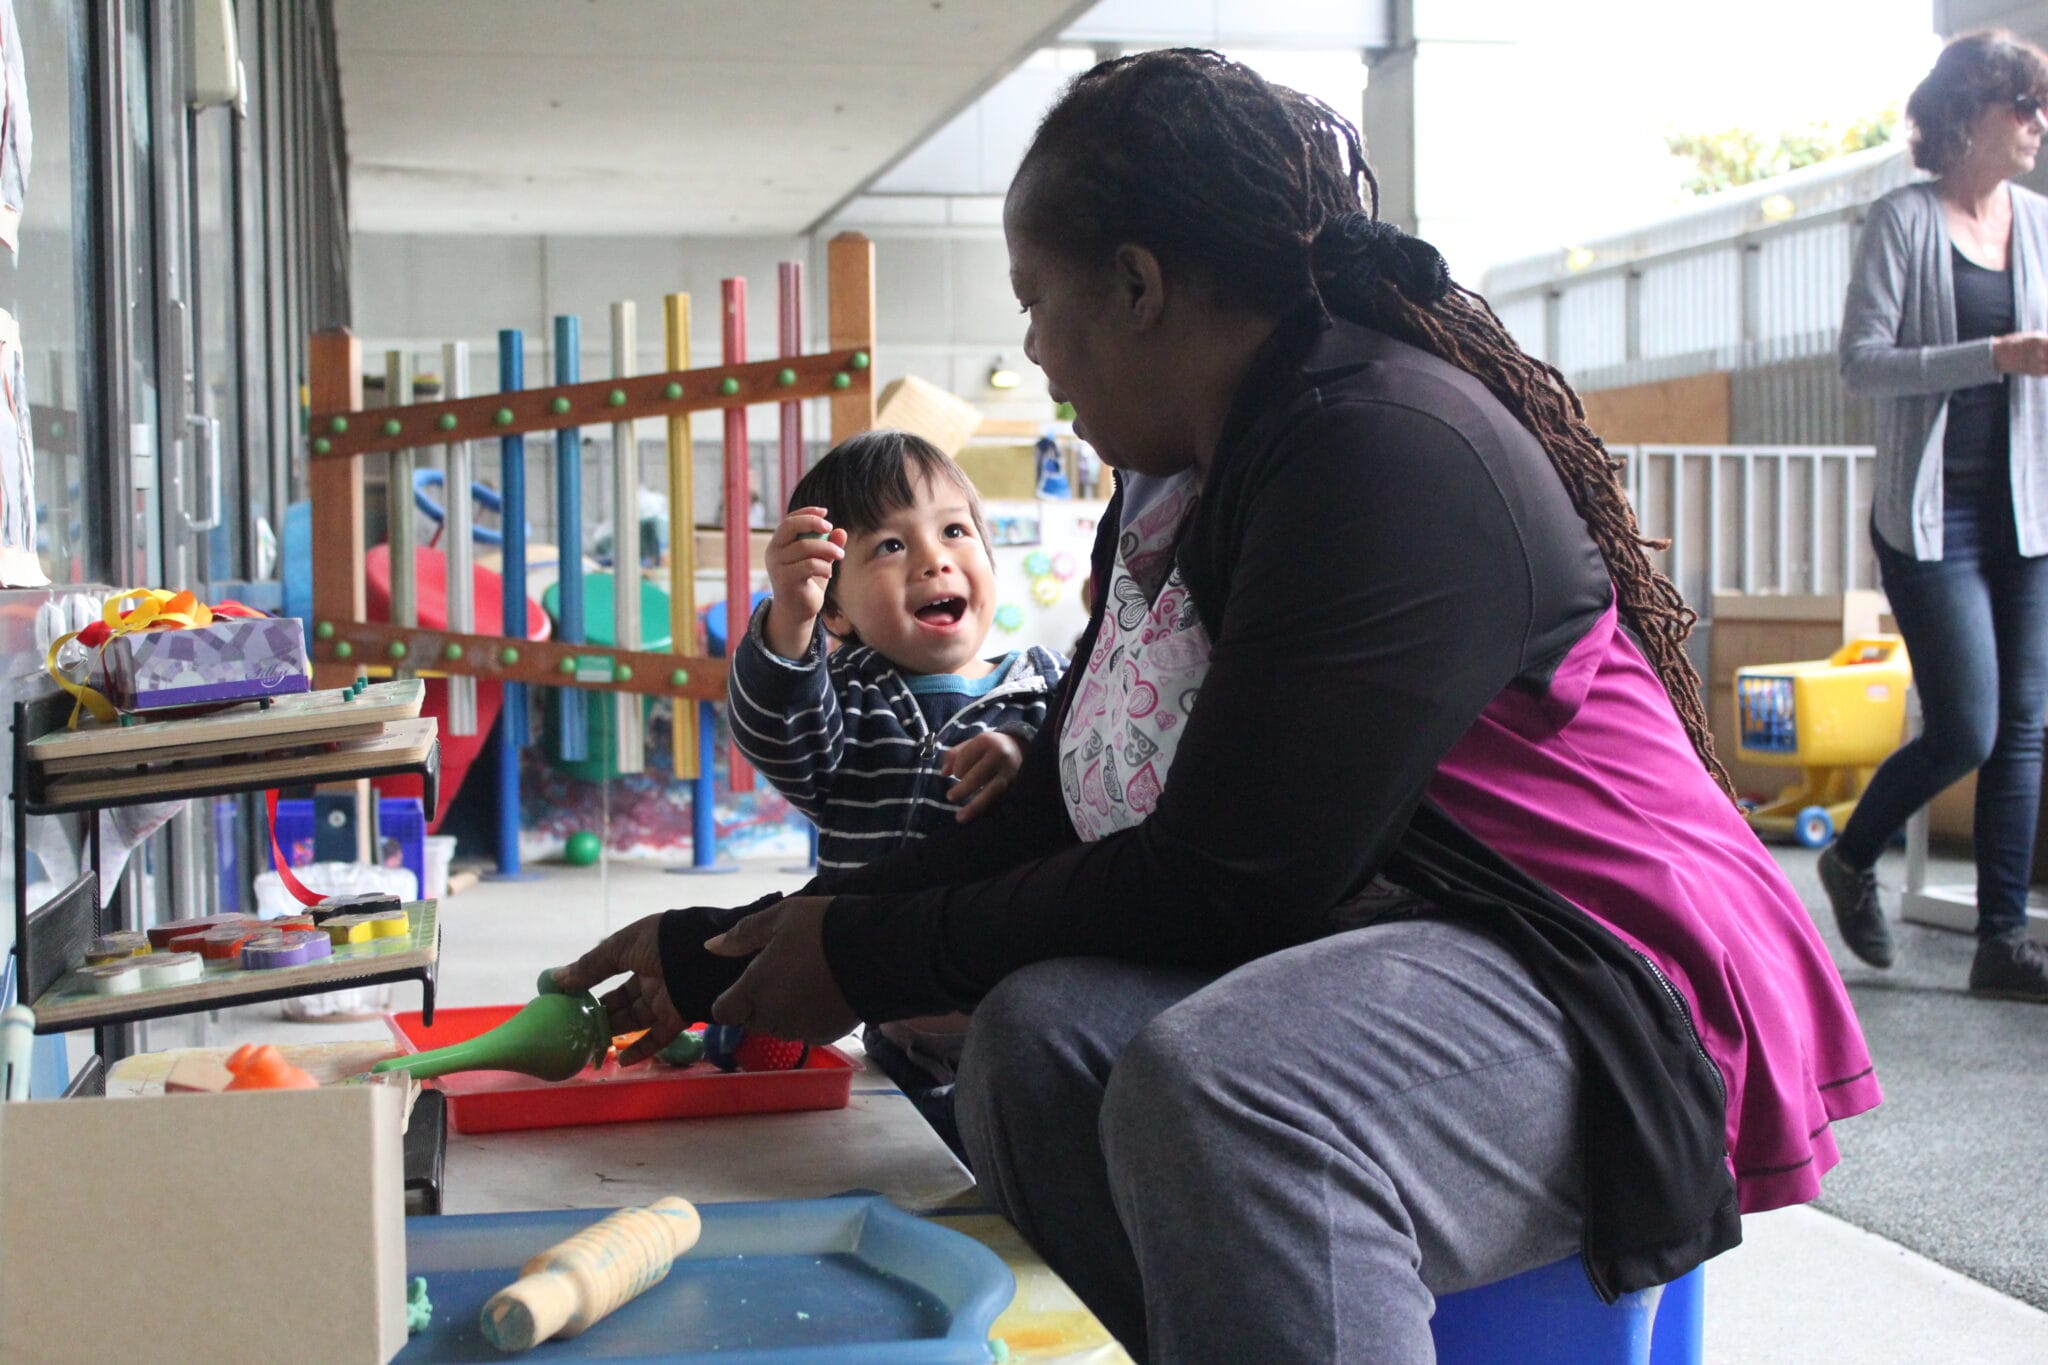 Early educator doing an activity with a child.